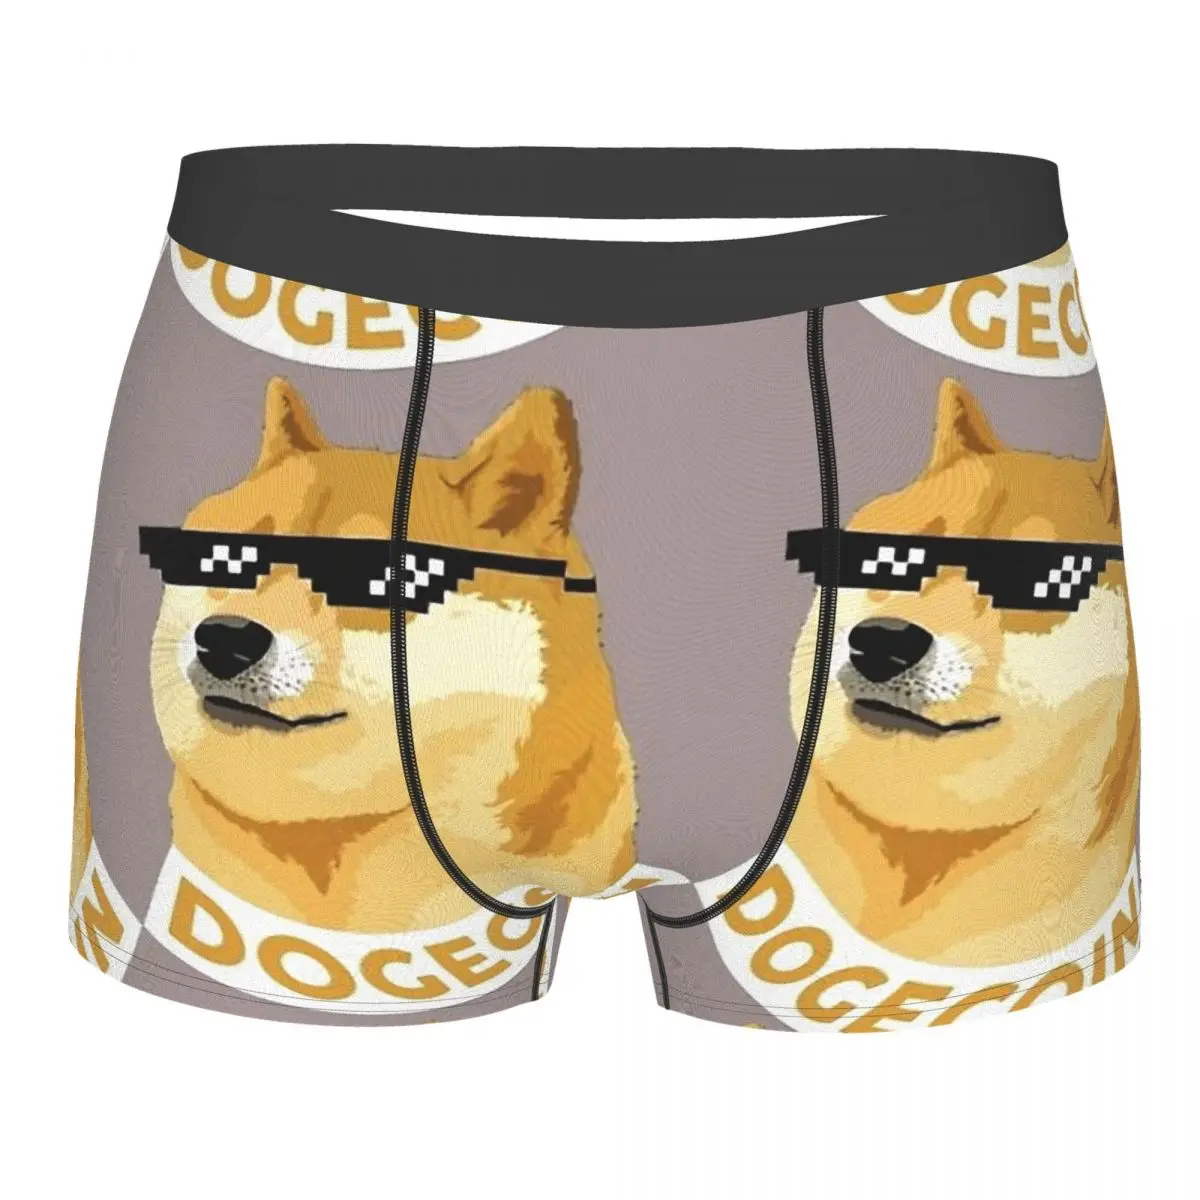 

Dogecoin Cryptocurrency Cool DOGE COIN Underpants Cotton Panties Male Underwear Ventilate Shorts Boxer Briefs